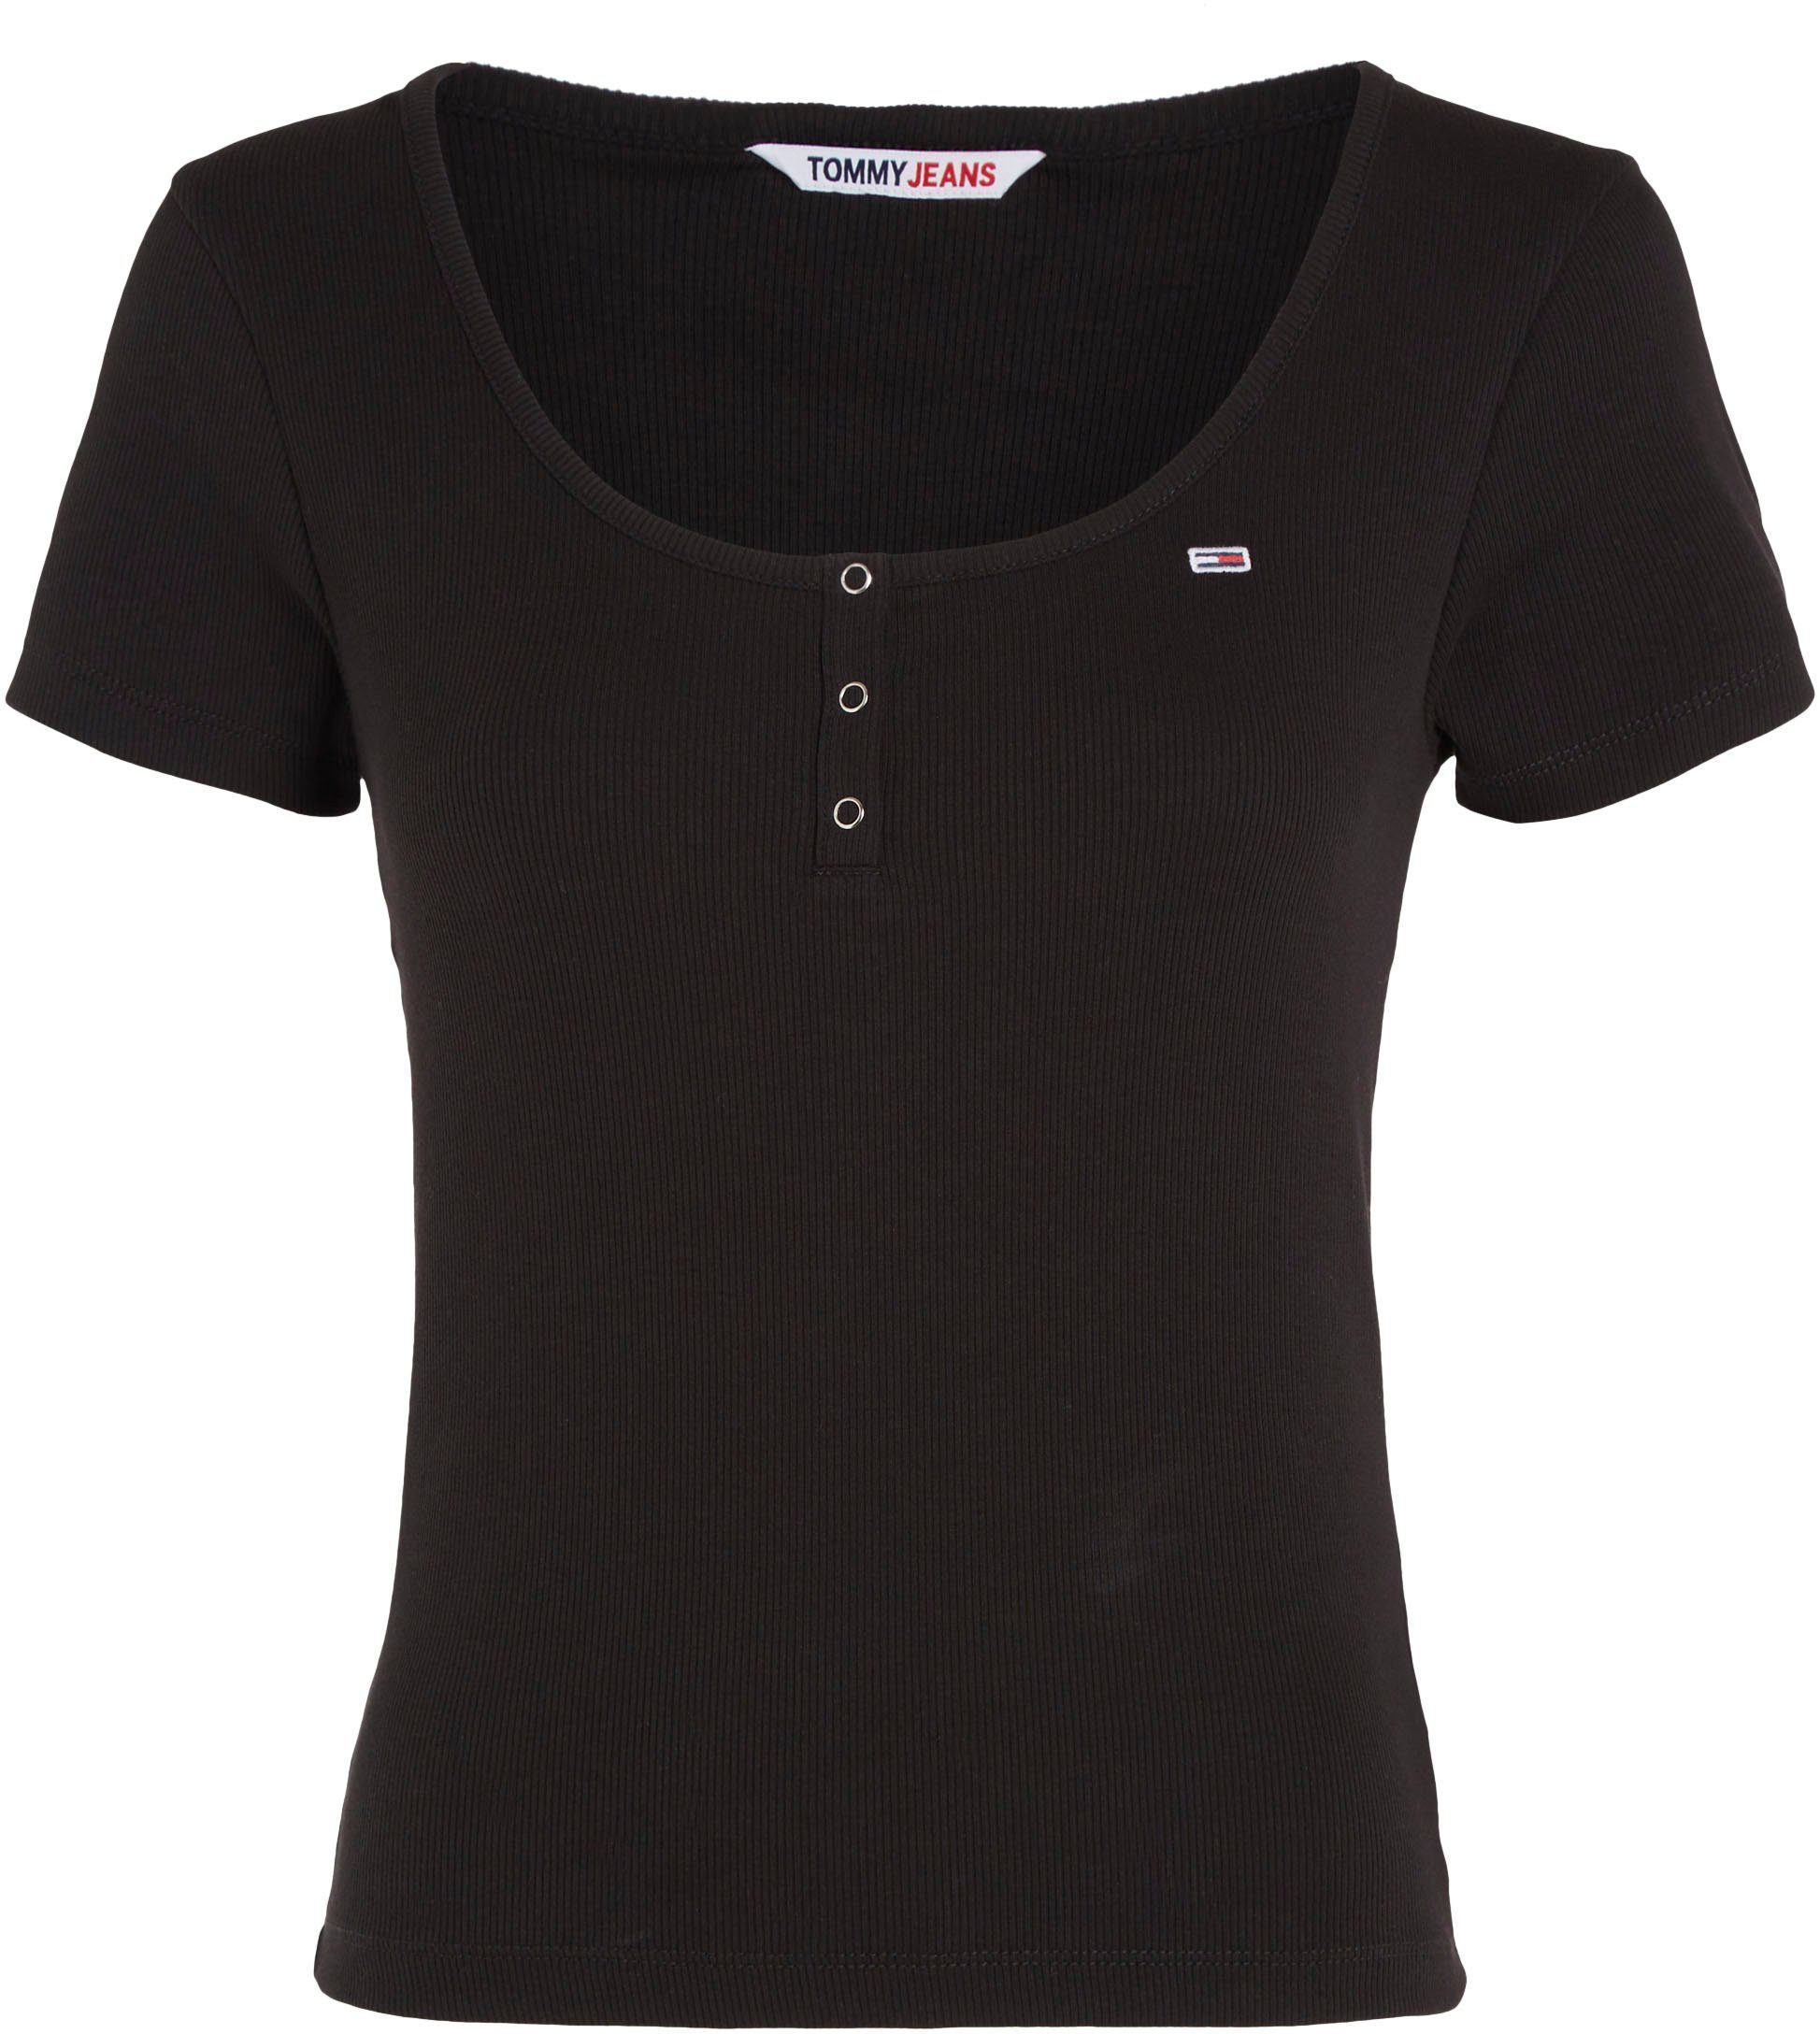 Tommy Jeans T-Shirt Black Jeans TJW mit BBY RIB Tommy BUTTON C-NECK Logostickerei